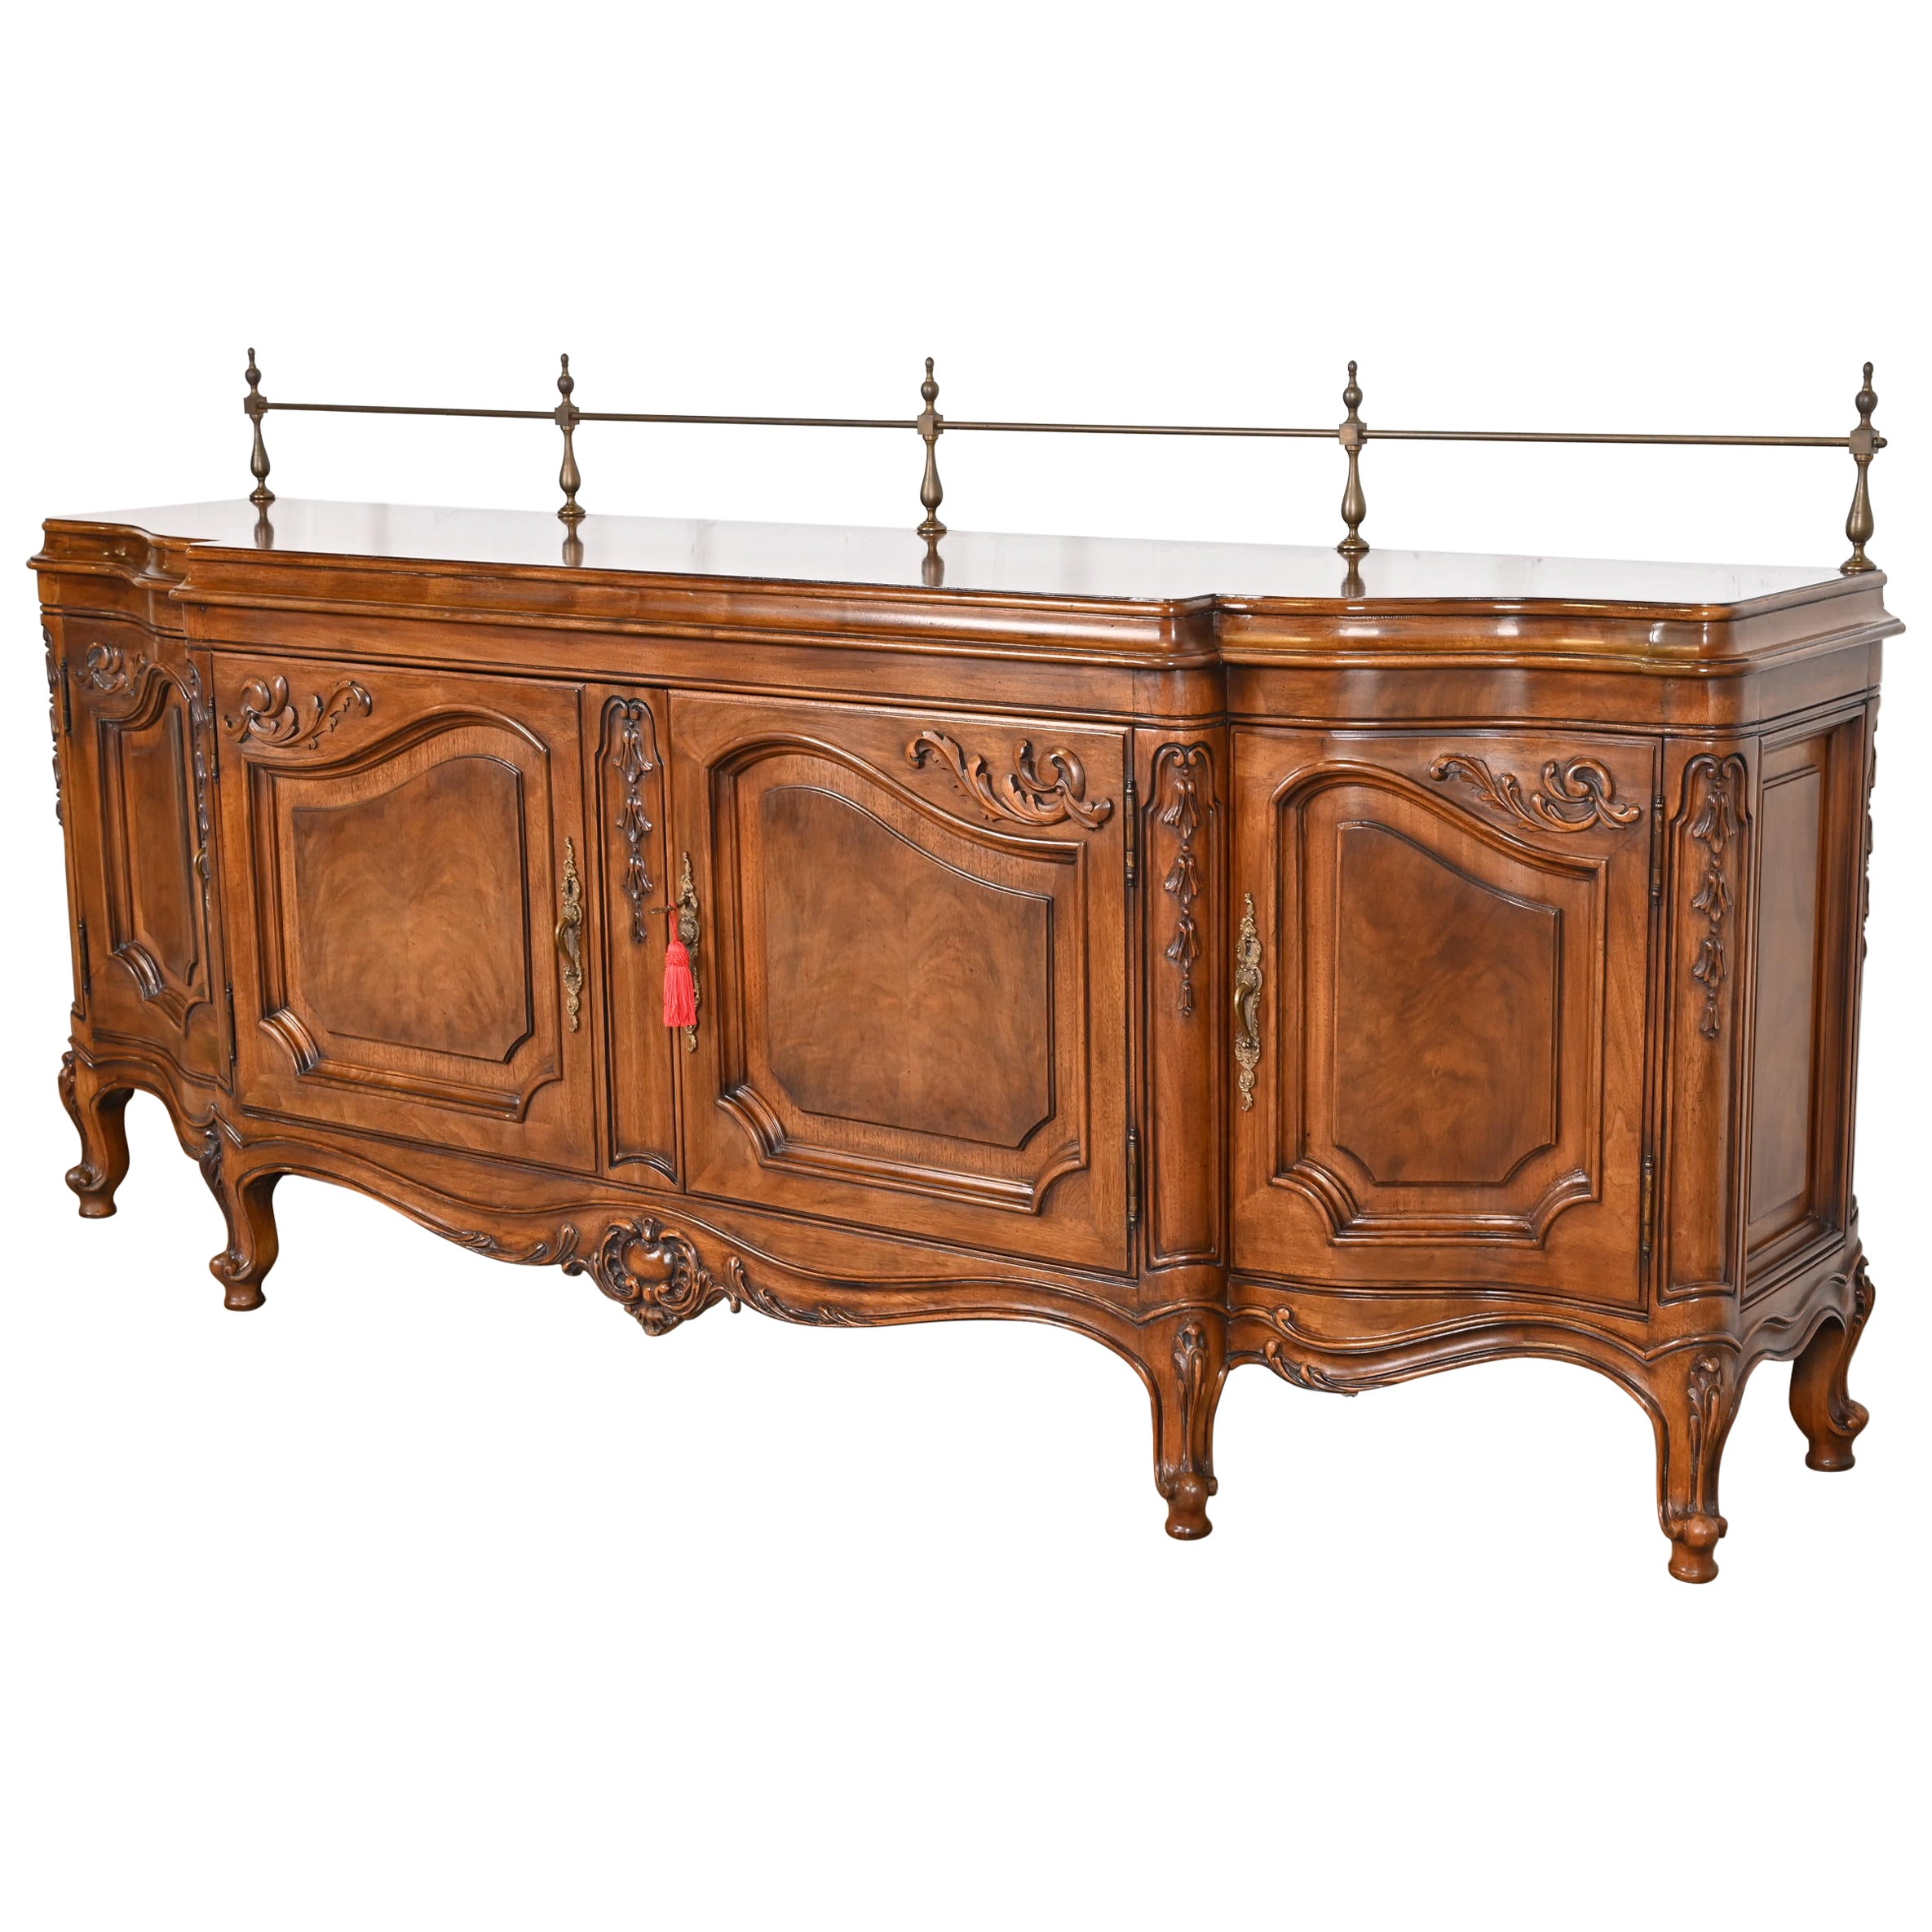 Karges French Provincial Louis XV Carved Burled Walnut Sideboard or Bar Cabinet